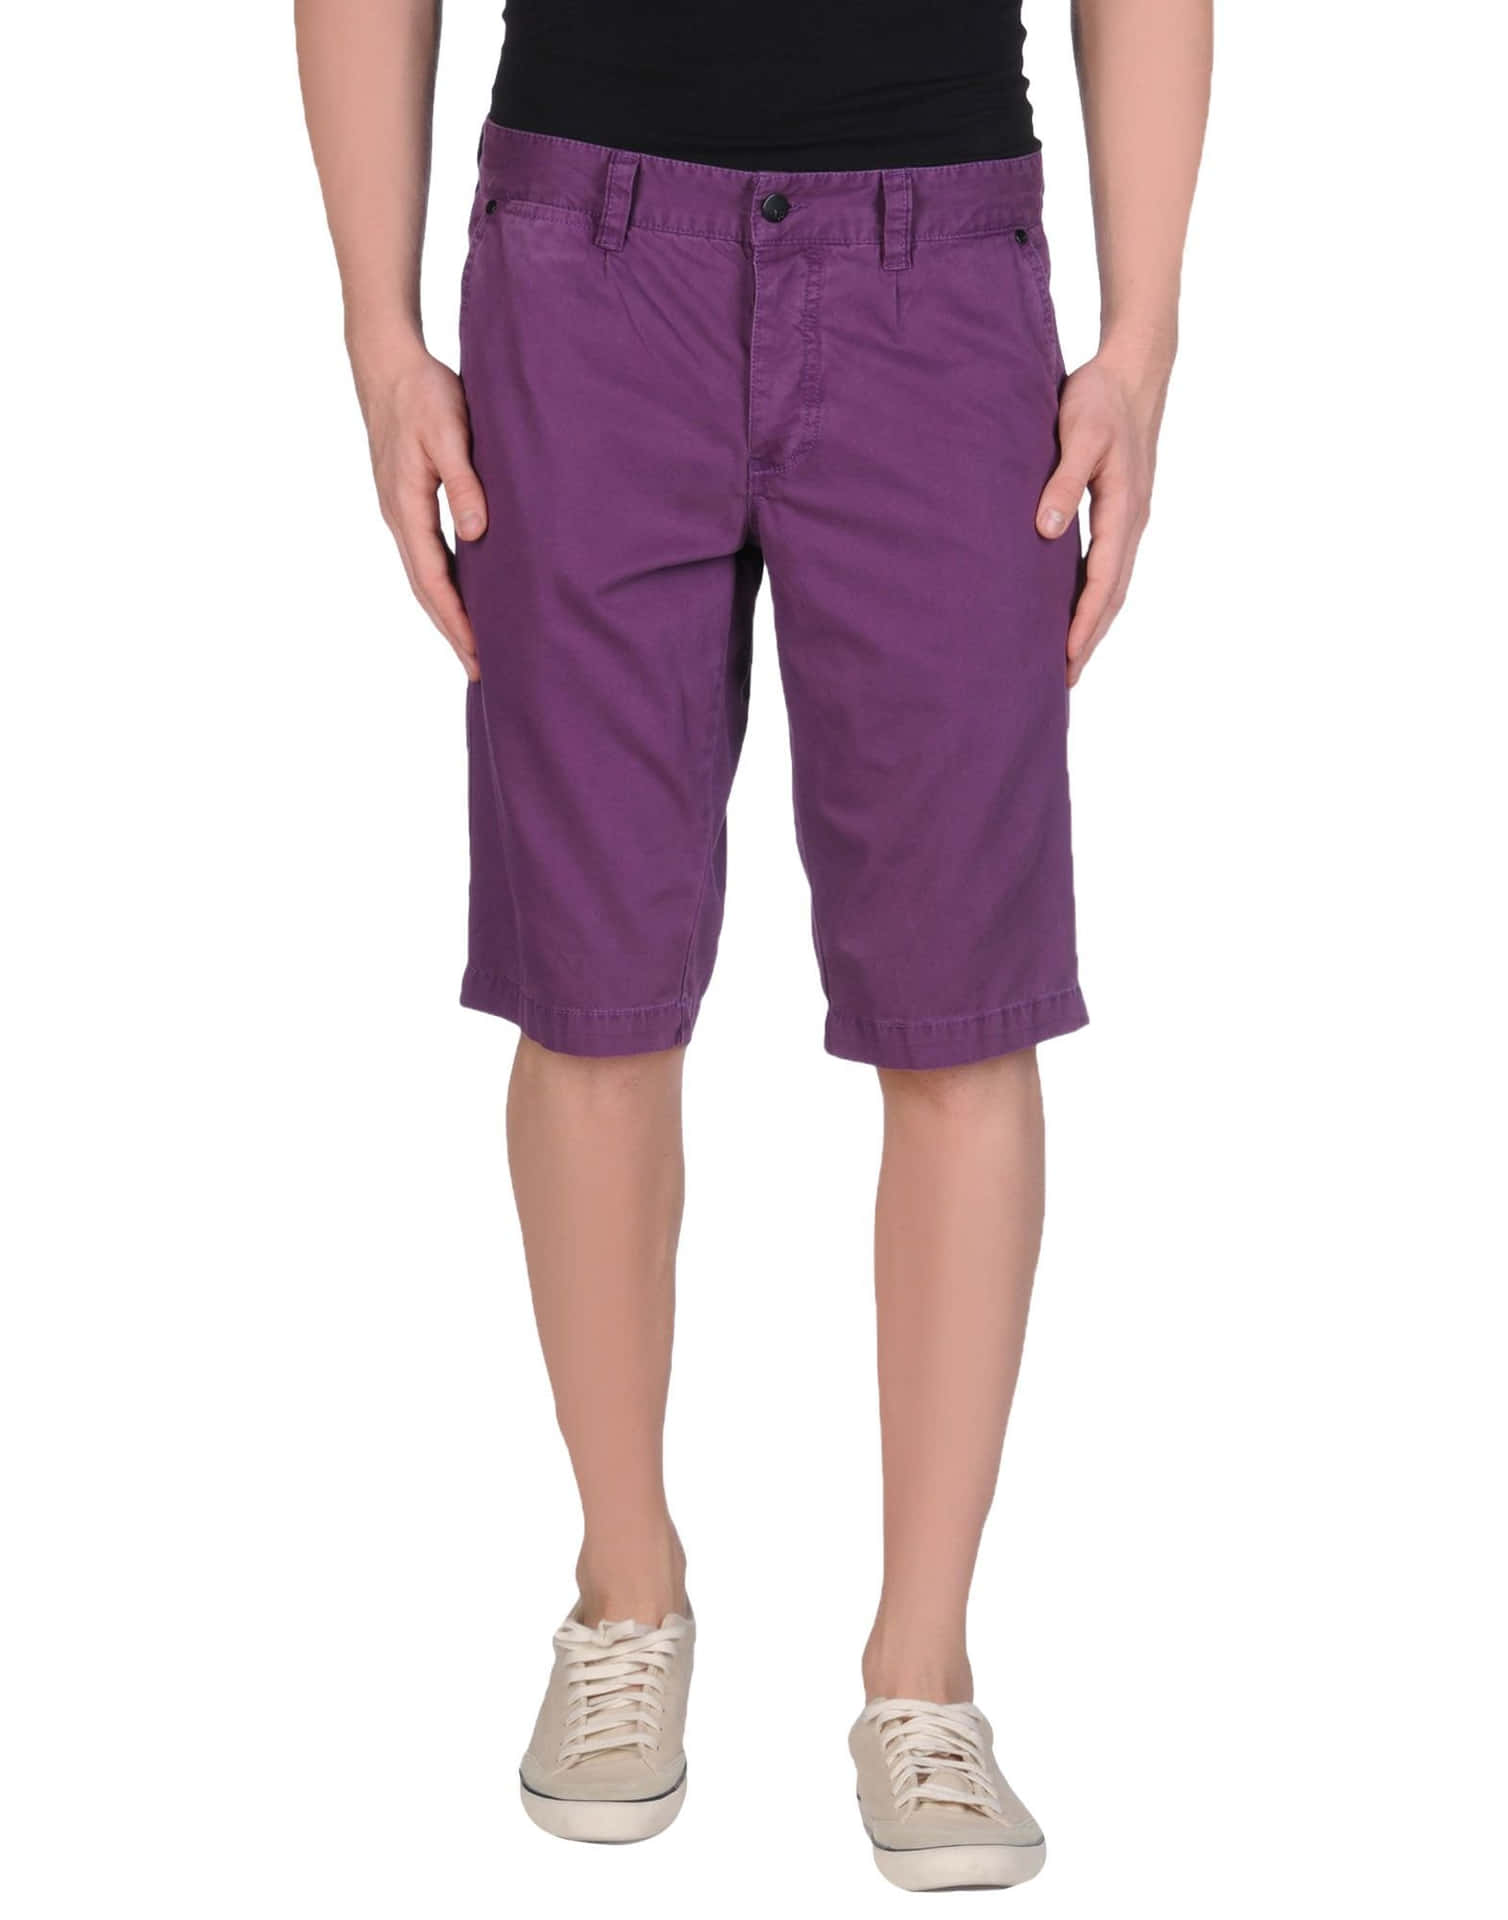 A stylish pair of purple shorts for your everyday look. Wallpaper